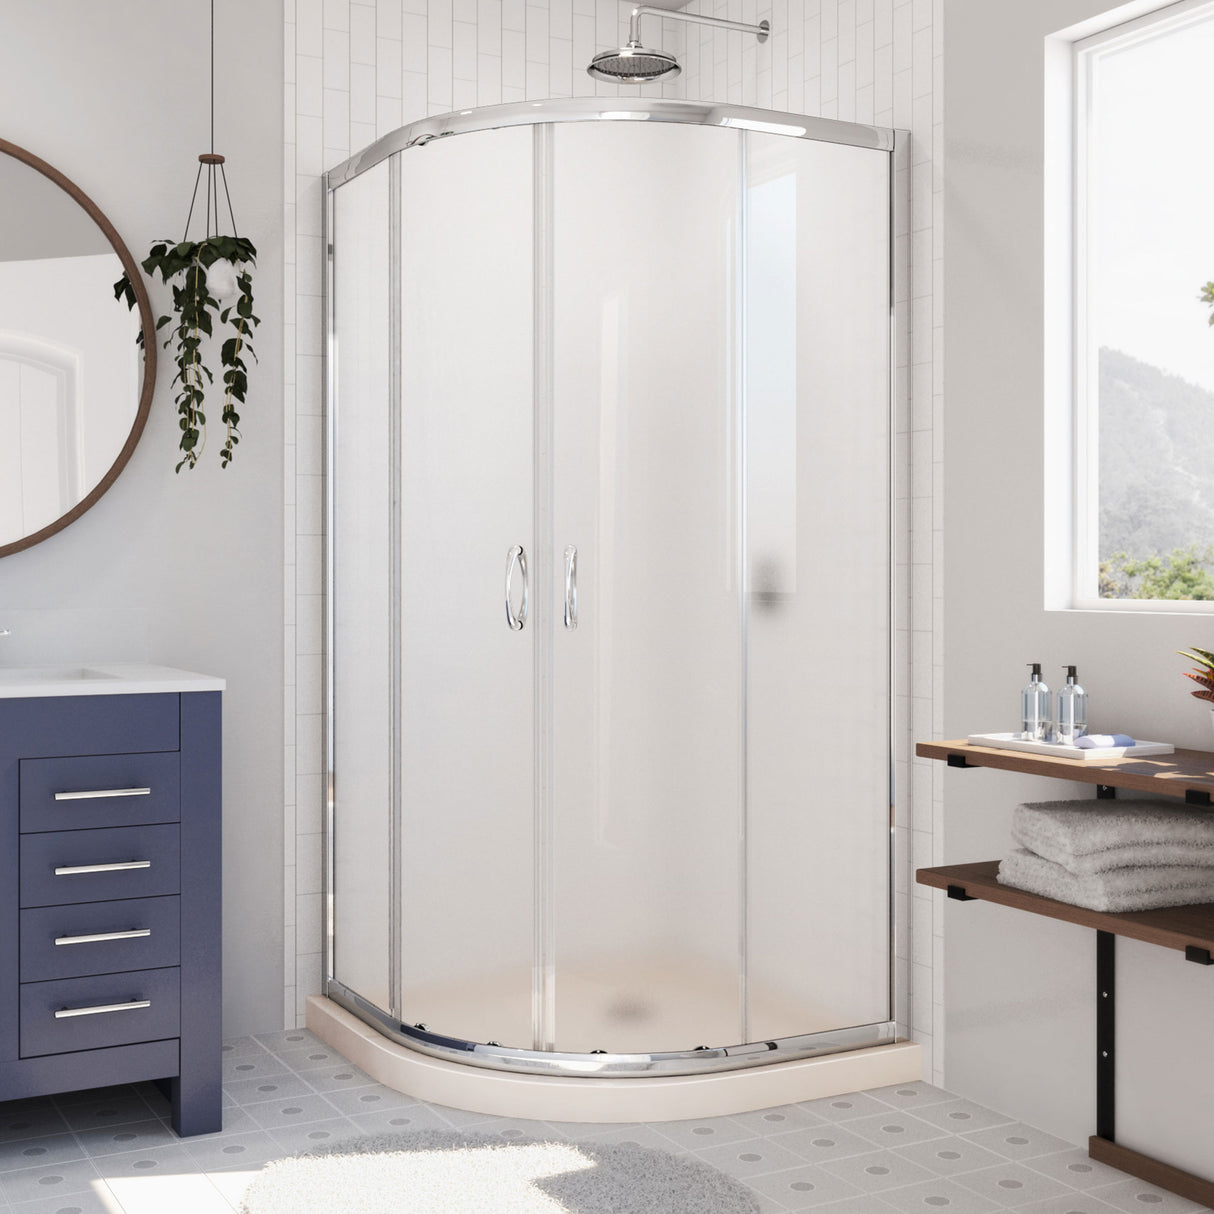 DreamLine Prime 38 in. x 74 3/4 in. Semi-Frameless Frosted Glass Sliding Shower Enclosure in Chrome with Biscuit Base